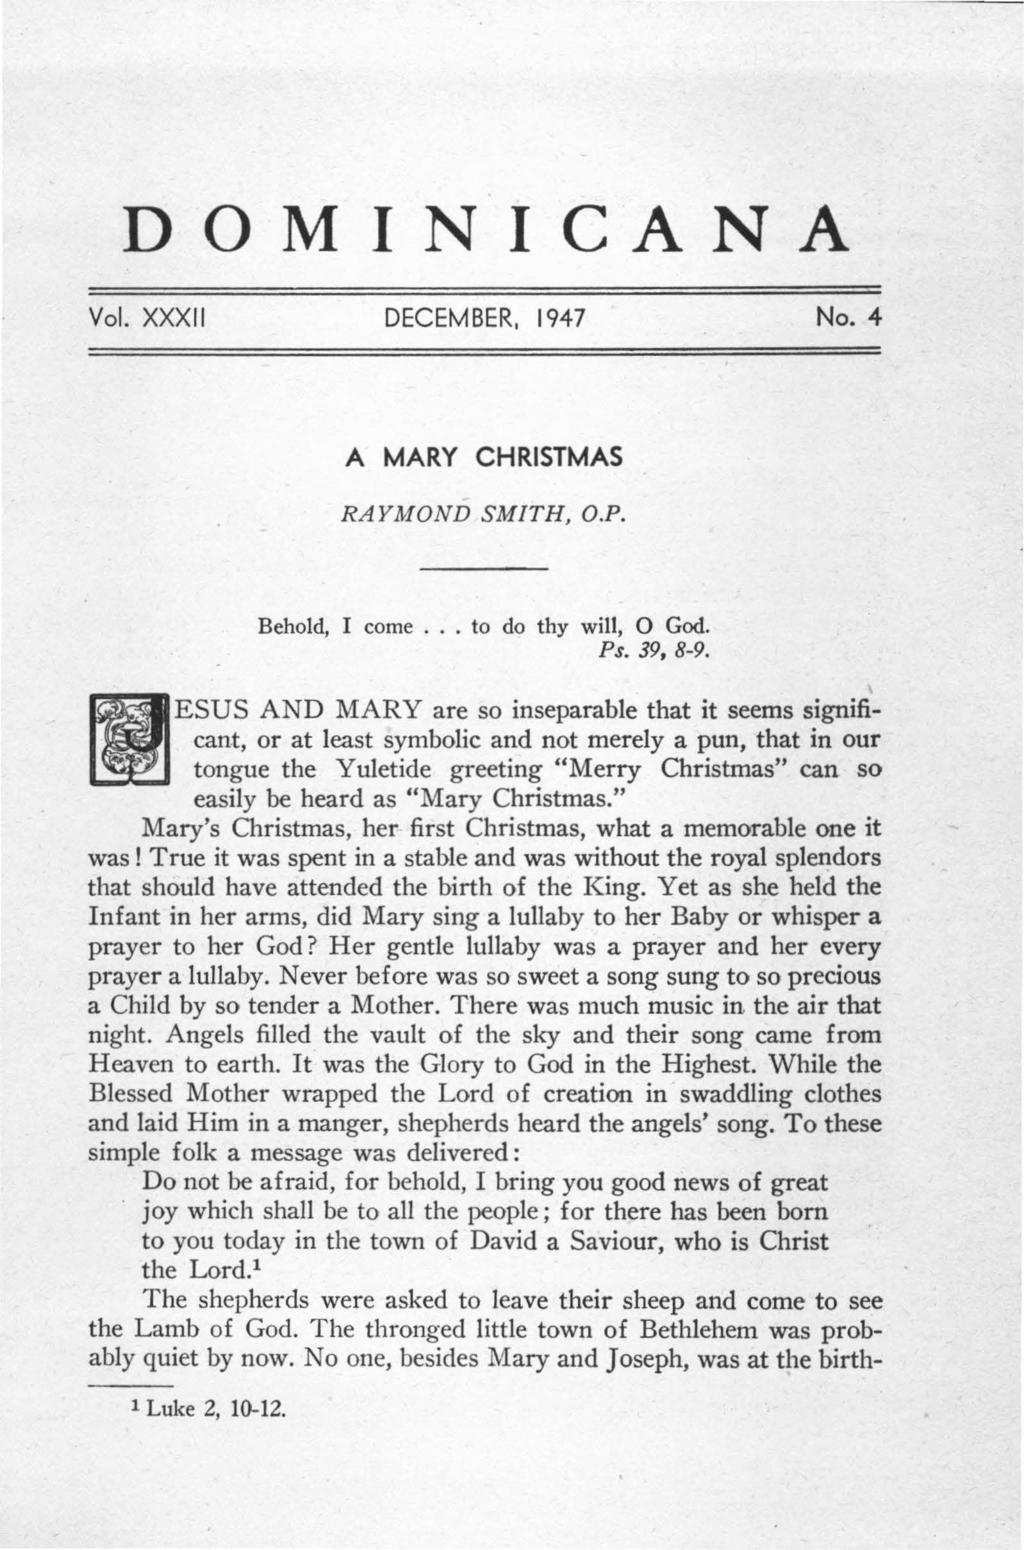 DOMINICAN A Vol. XXXII DECEMBER, 1947 No. 4 A MARY CHRISTMAS RAYMOND SMITH, O.P. Behold, I come... to do thy will, 0 God. Ps. 39, 8-9.